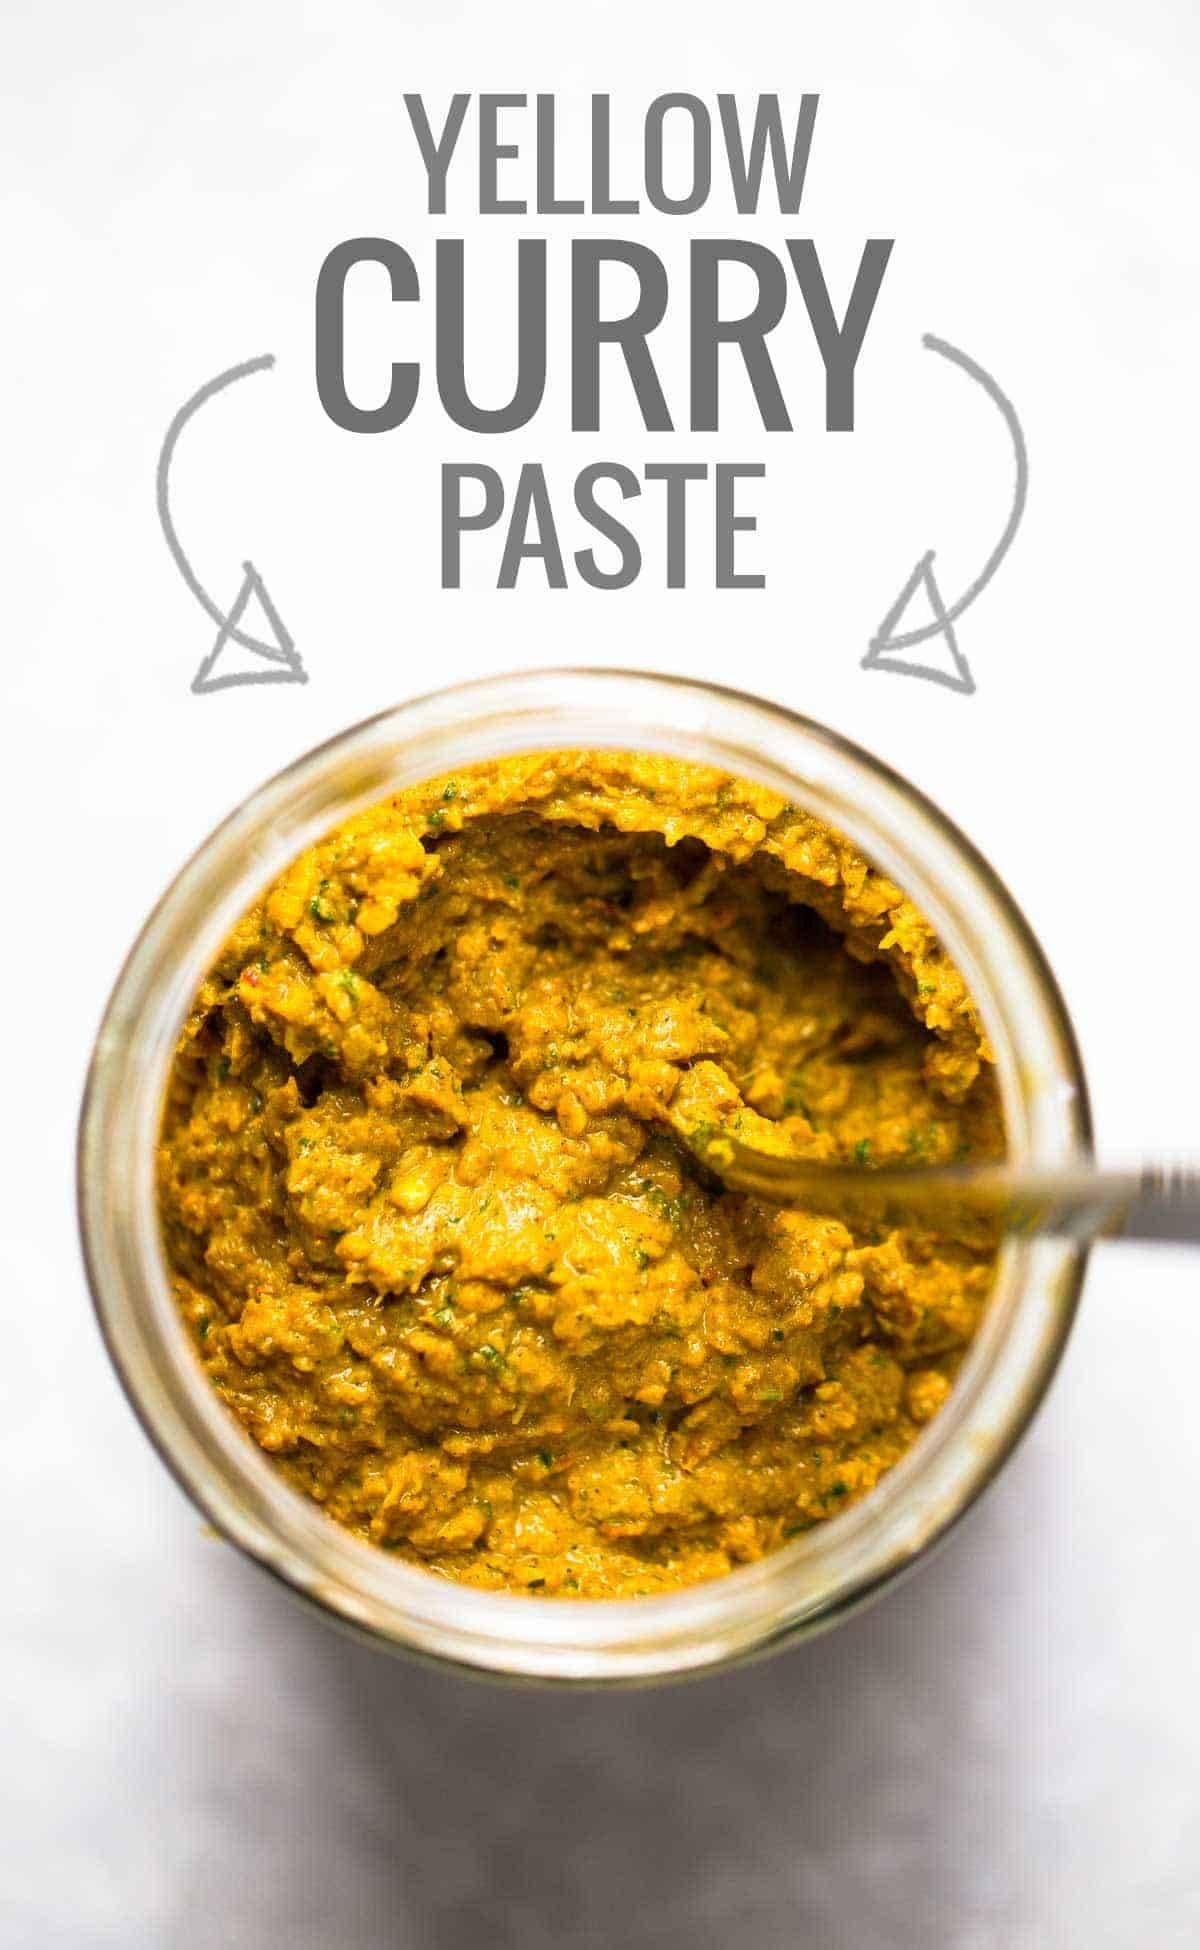 Spice Up Your Life: The Ultimate Guide to Homemade Curry Paste